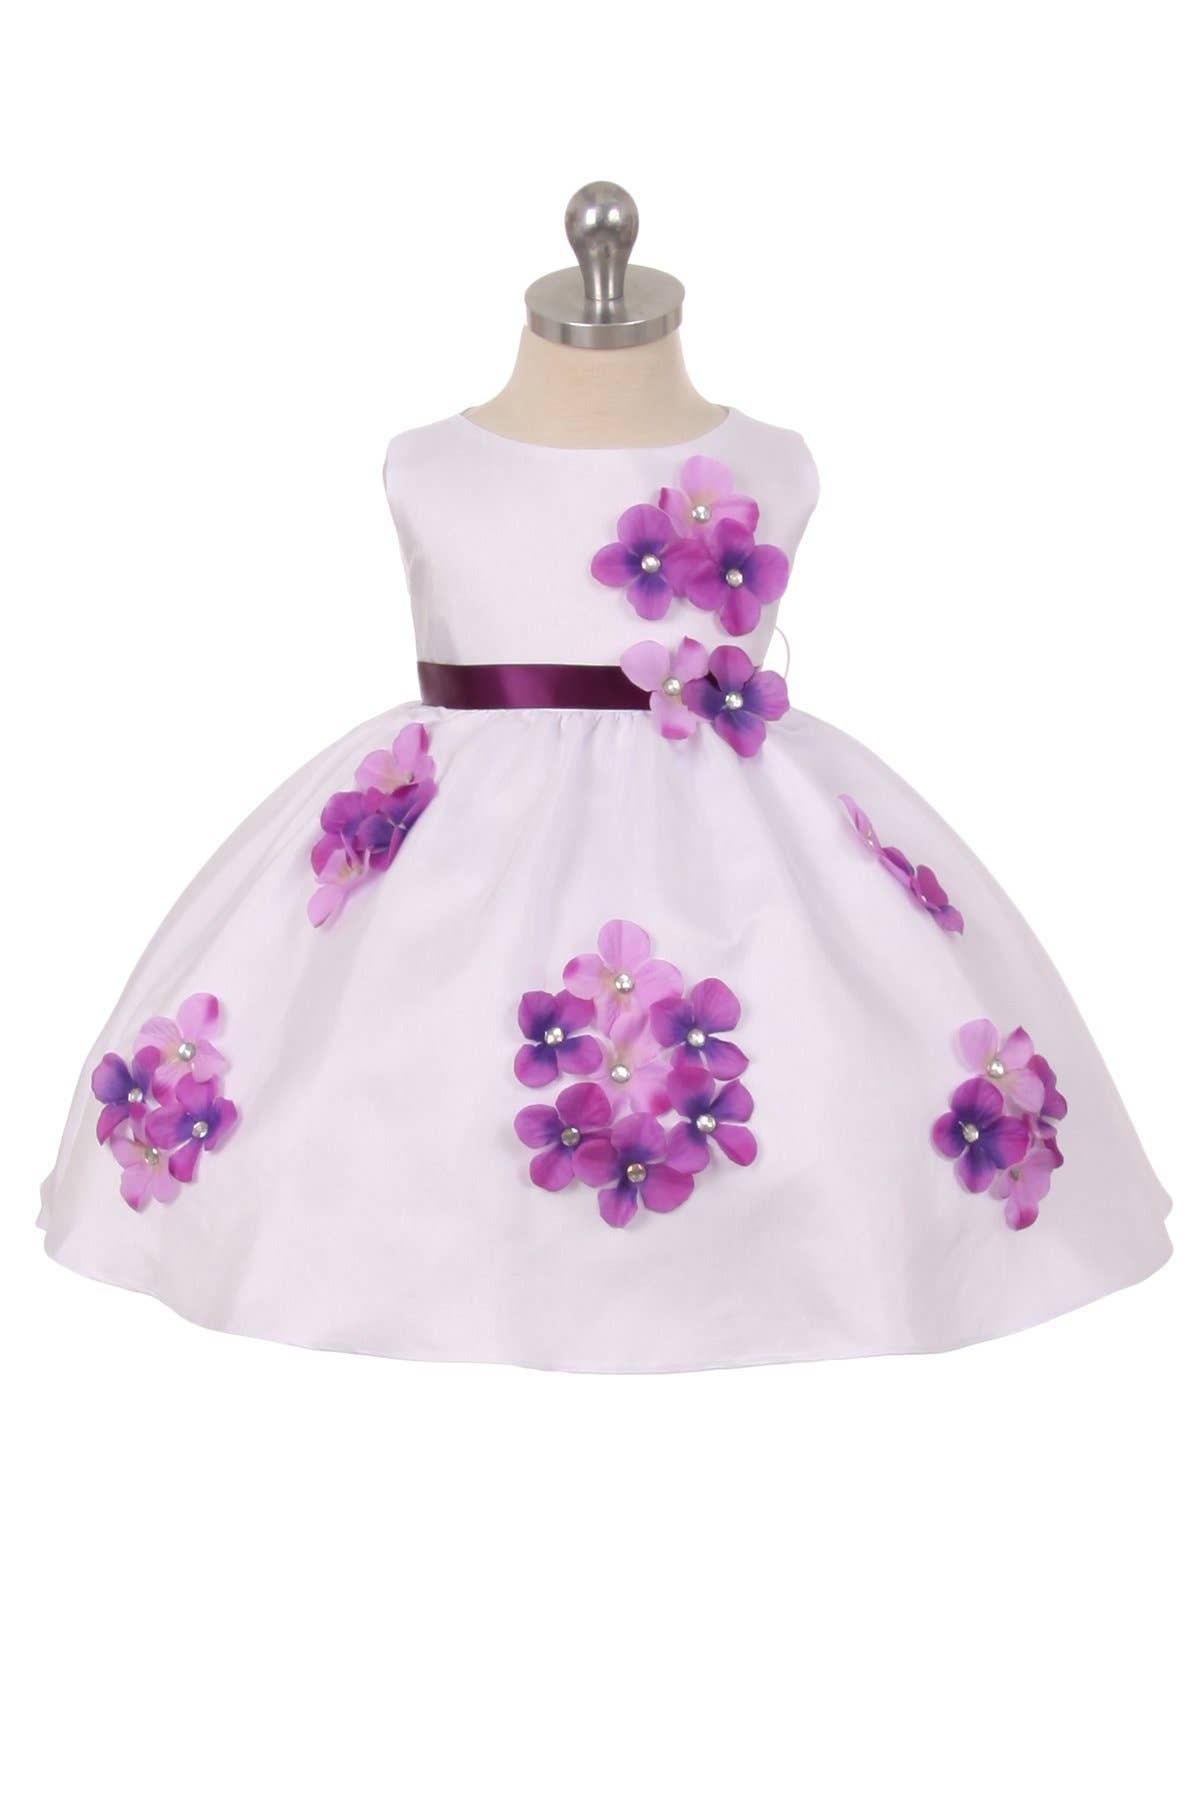 Shantung Dress Decorated with Flower Petals